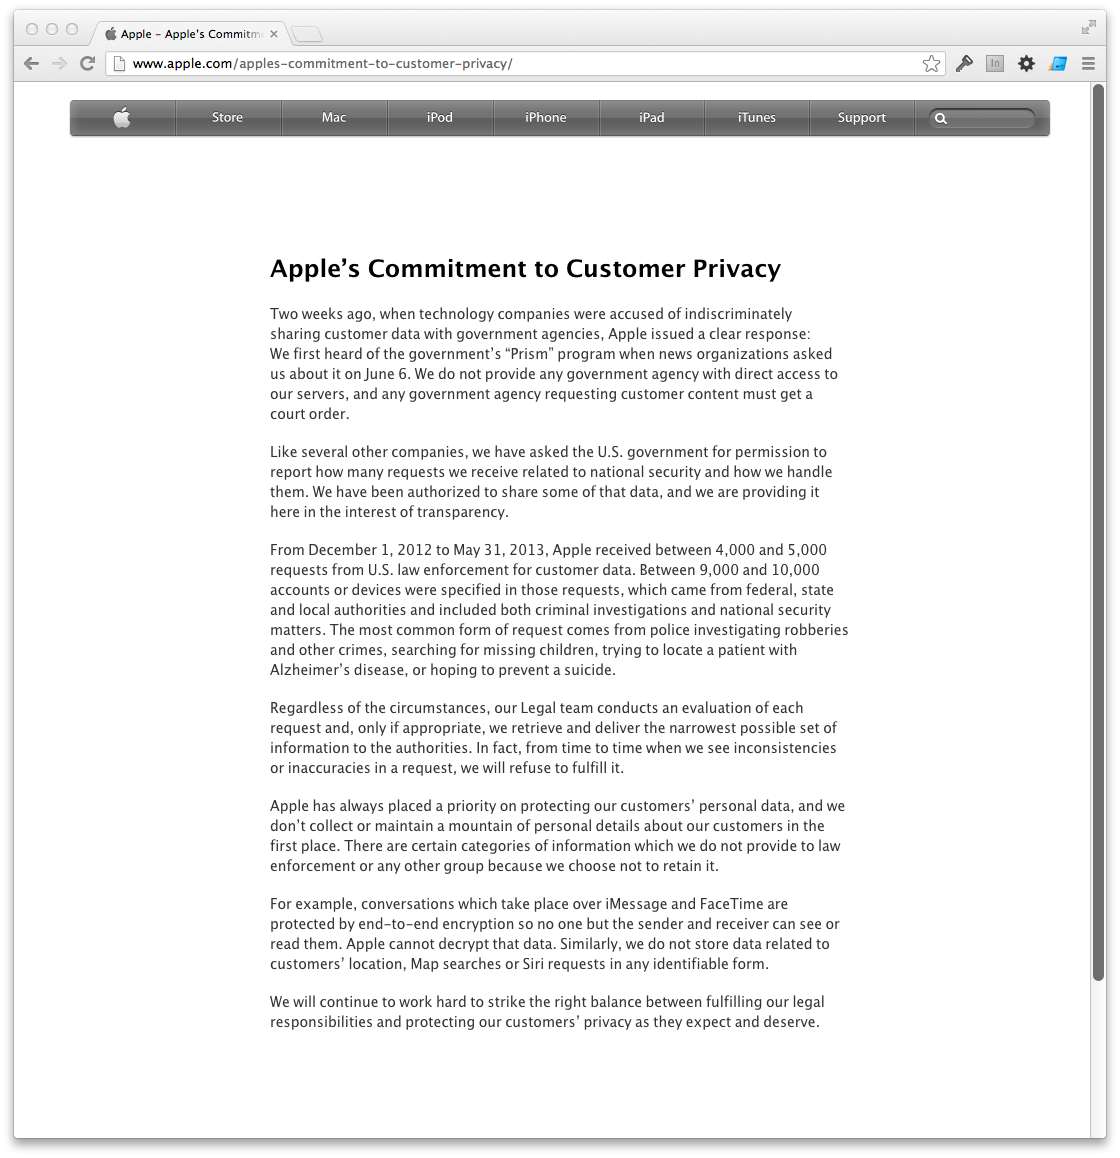 Apple’s Commitment to Customer Privacy